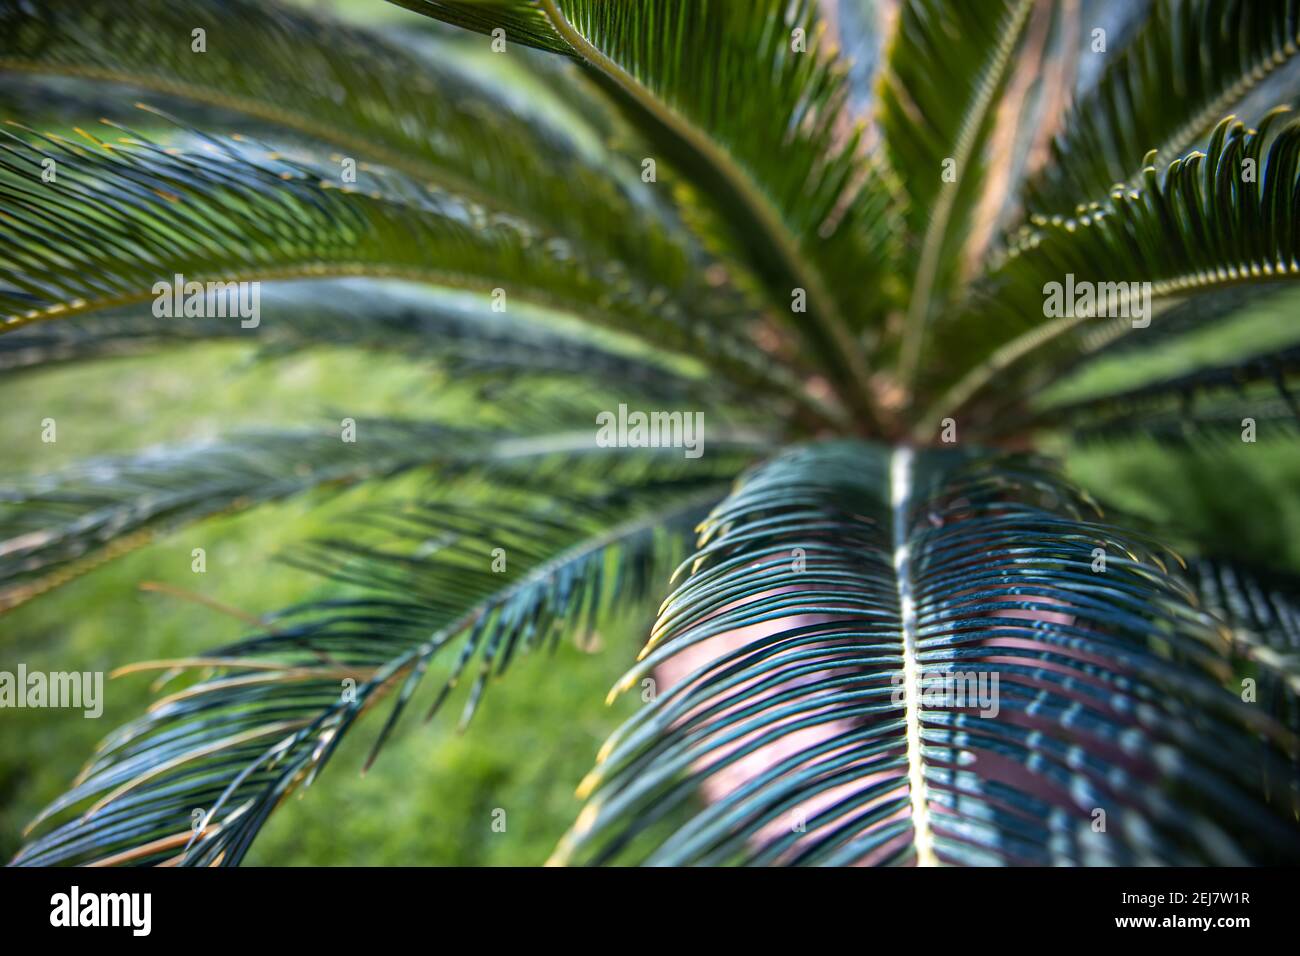 Close up of green branches of an Egyptian palm tree in the garden. Stock Photo